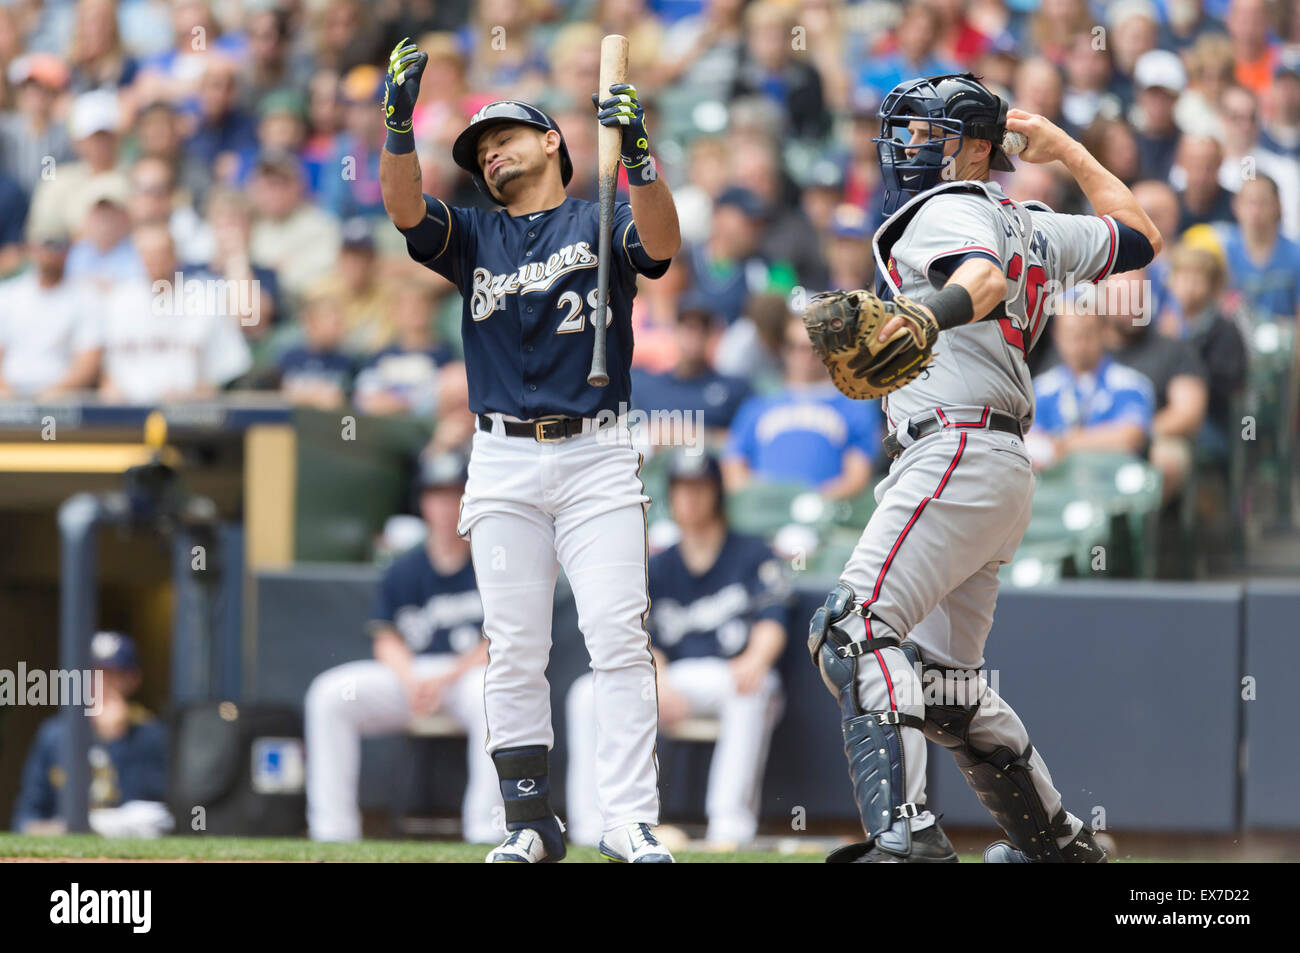 Milwaukee, WI, USA. 8th July, 2015. Milwaukee Brewers center fielder Gerardo Parra #28 disagrees on a check swing call by the third base umpire during the Major League Baseball game between the Milwaukee Brewers and the Atlanta Braves at Miller Park in Milwaukee, WI. John Fisher/CSM/Alamy Live News Stock Photo